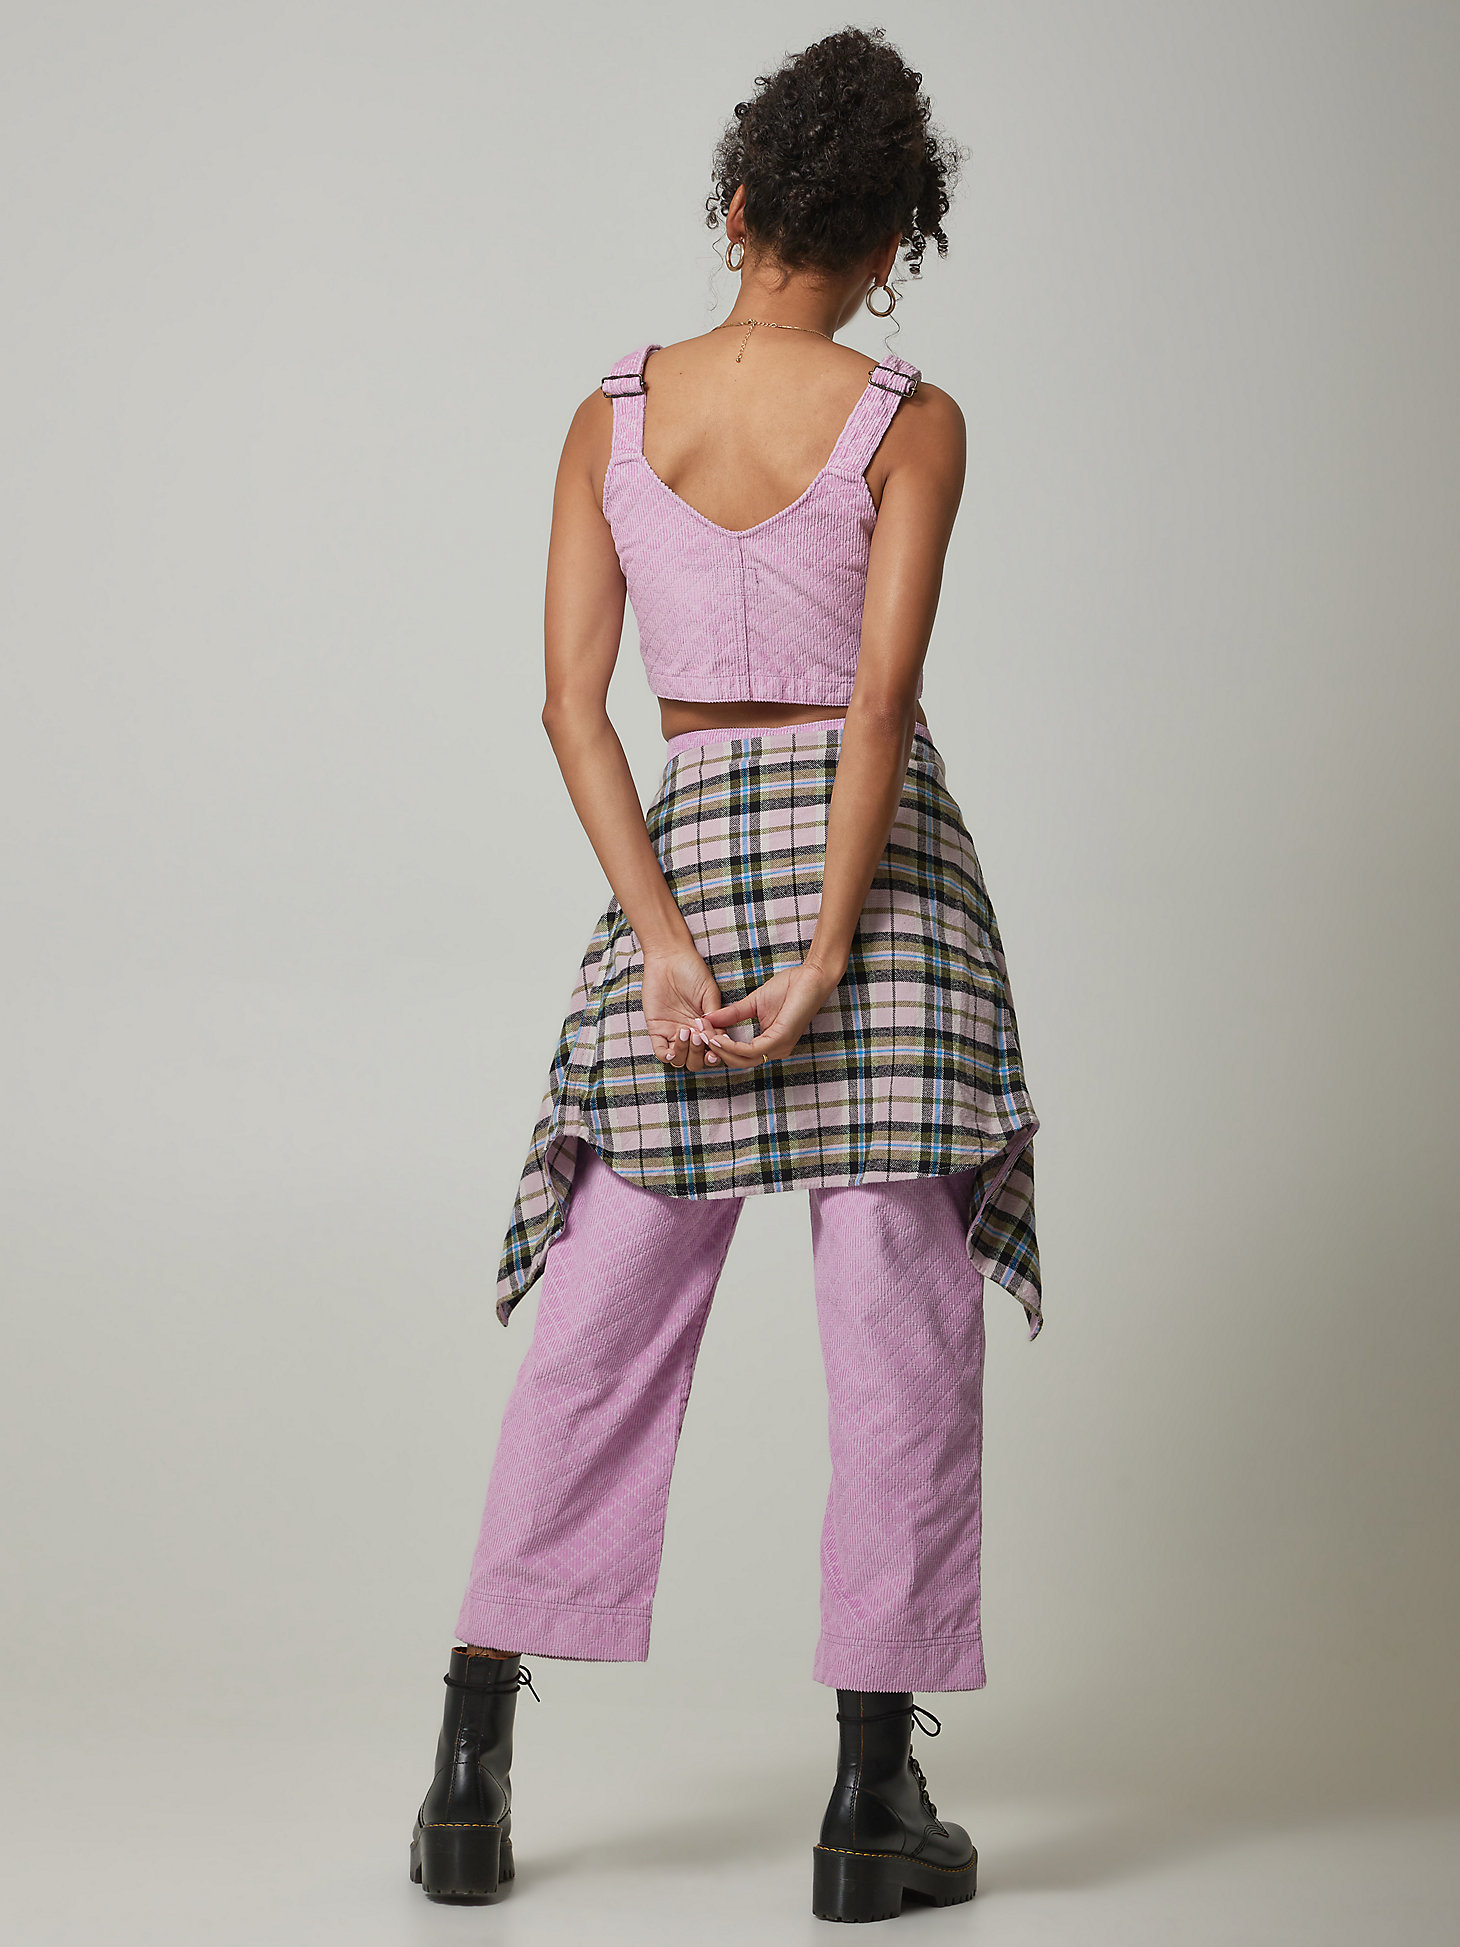 Lee® x The Brooklyn Circus® Whizit Top in Sugar Lilac alternative view 2